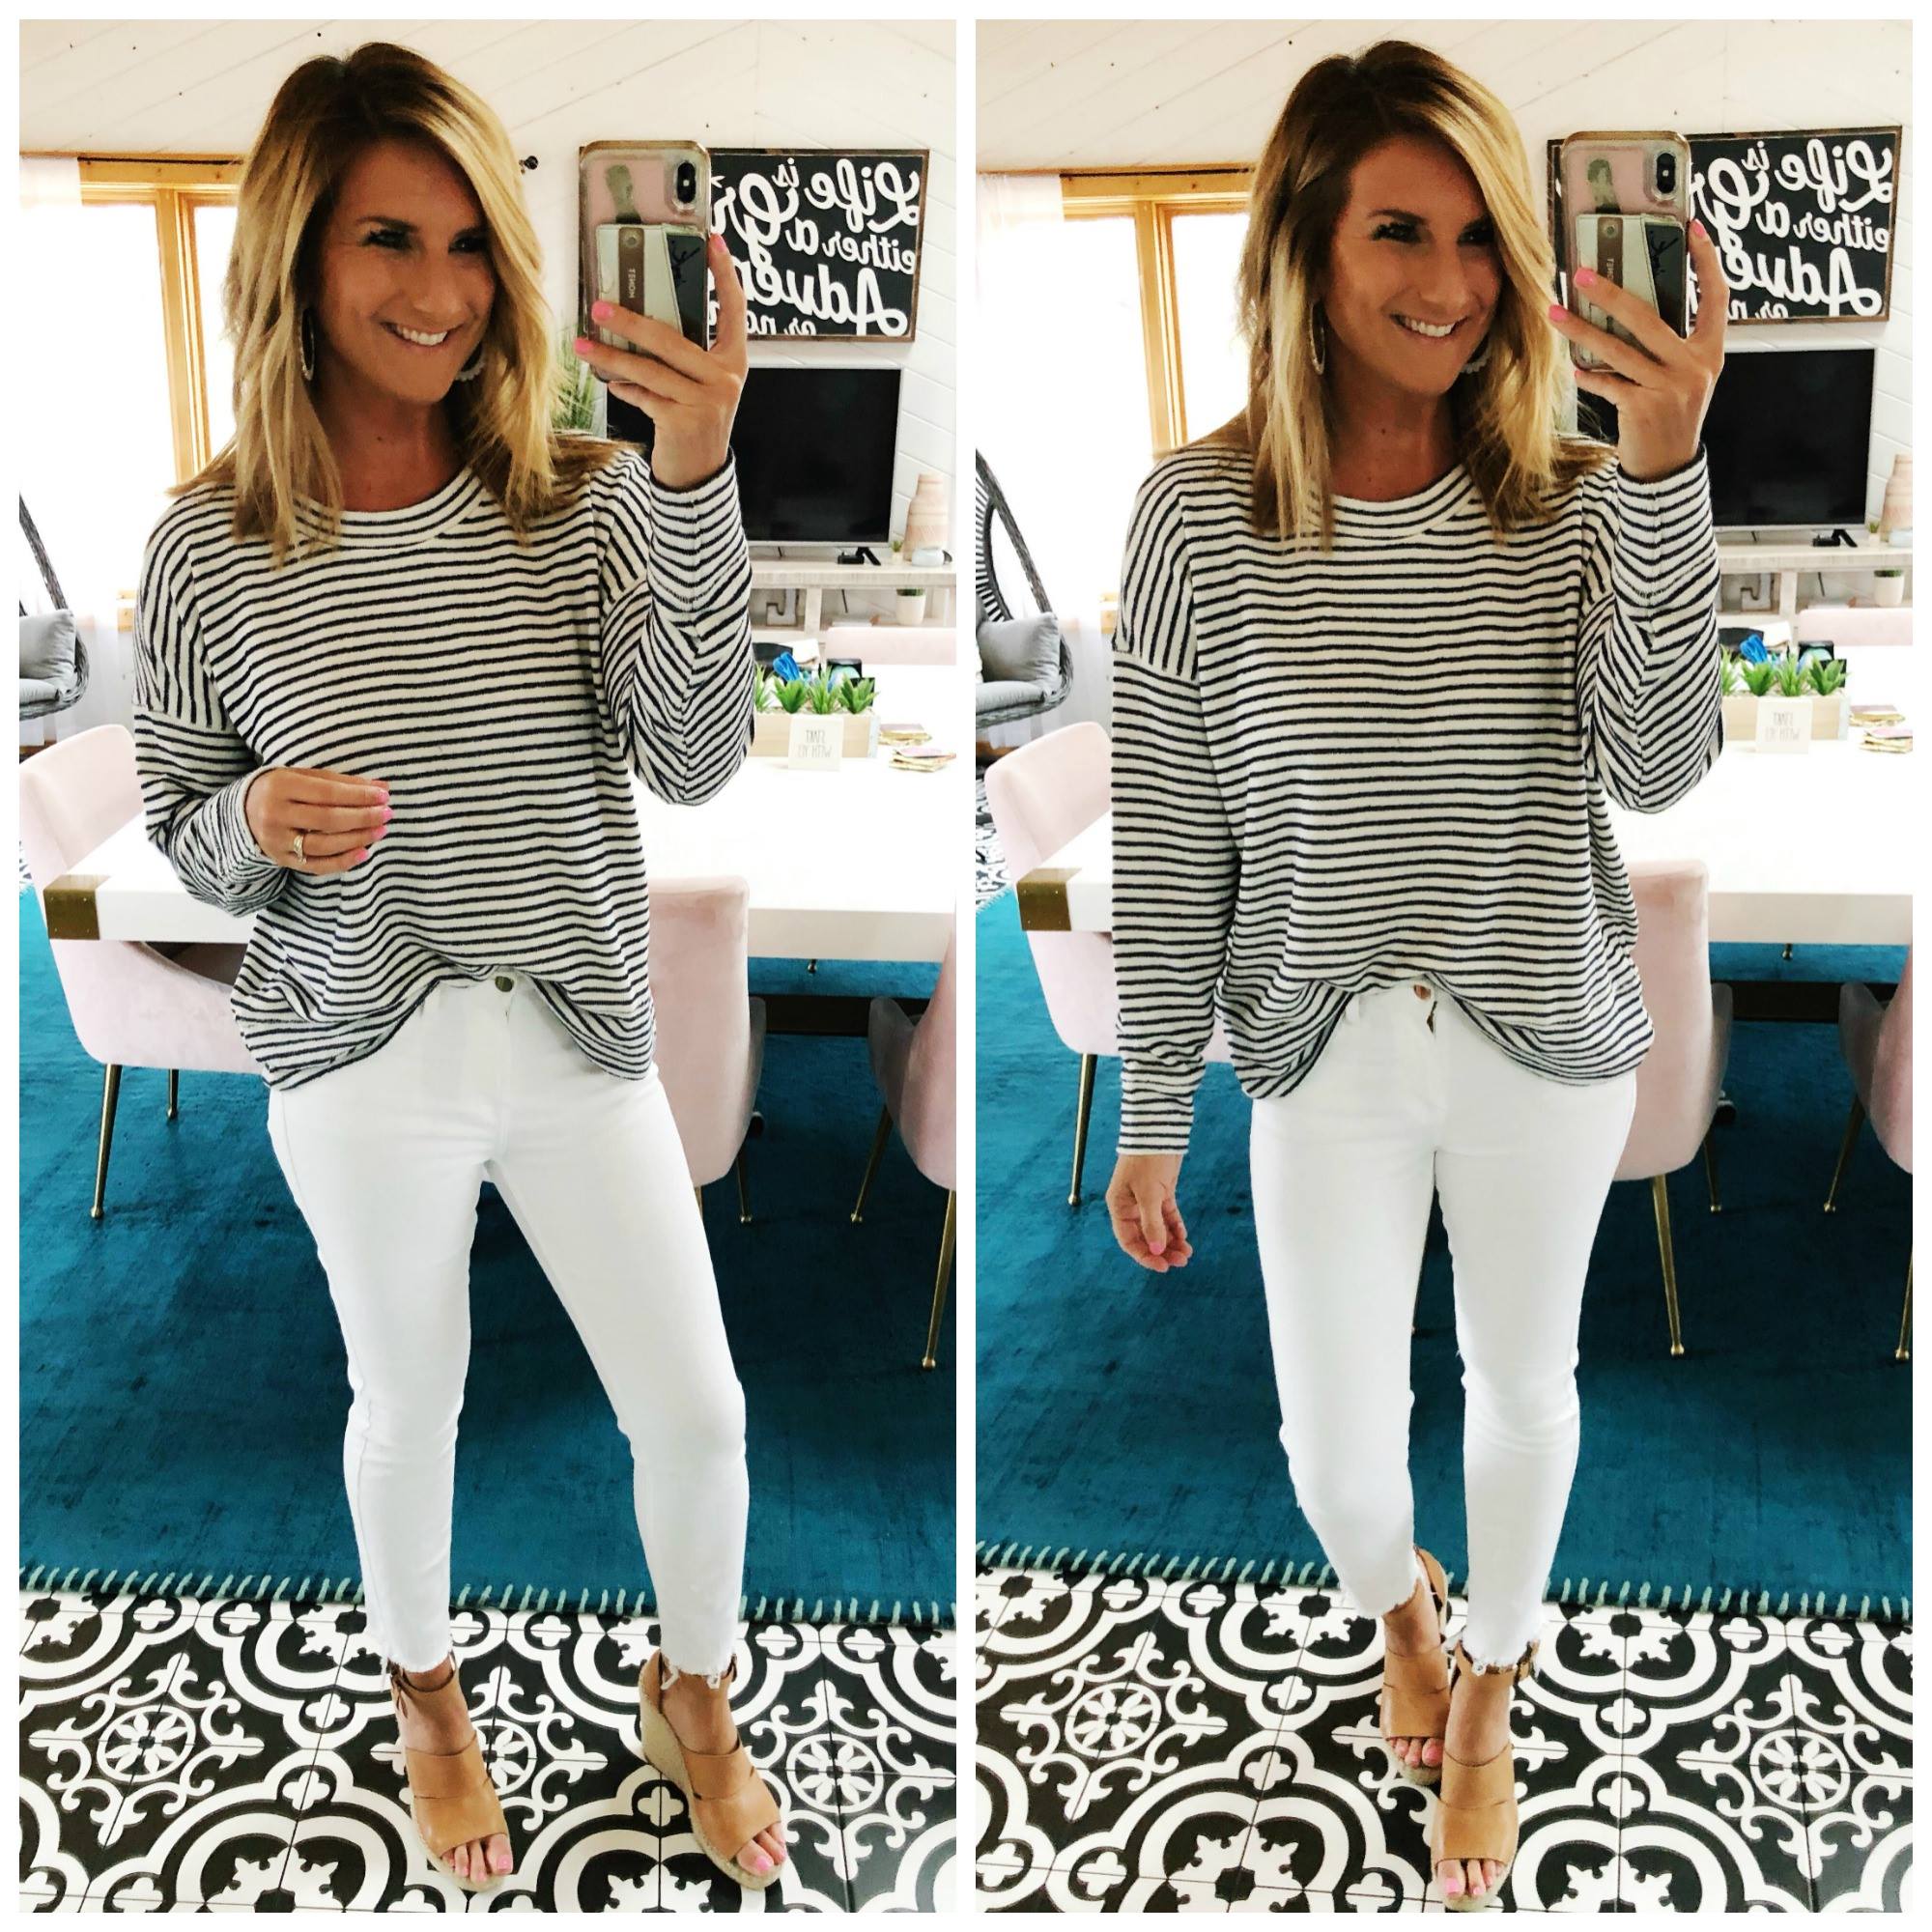 Comfortable Sweatshirt // Spring Sweatshirt // Transitional Outfit // Spring to Winter Outfit // White Jeans // Best White Jeans // Wedge Sandals